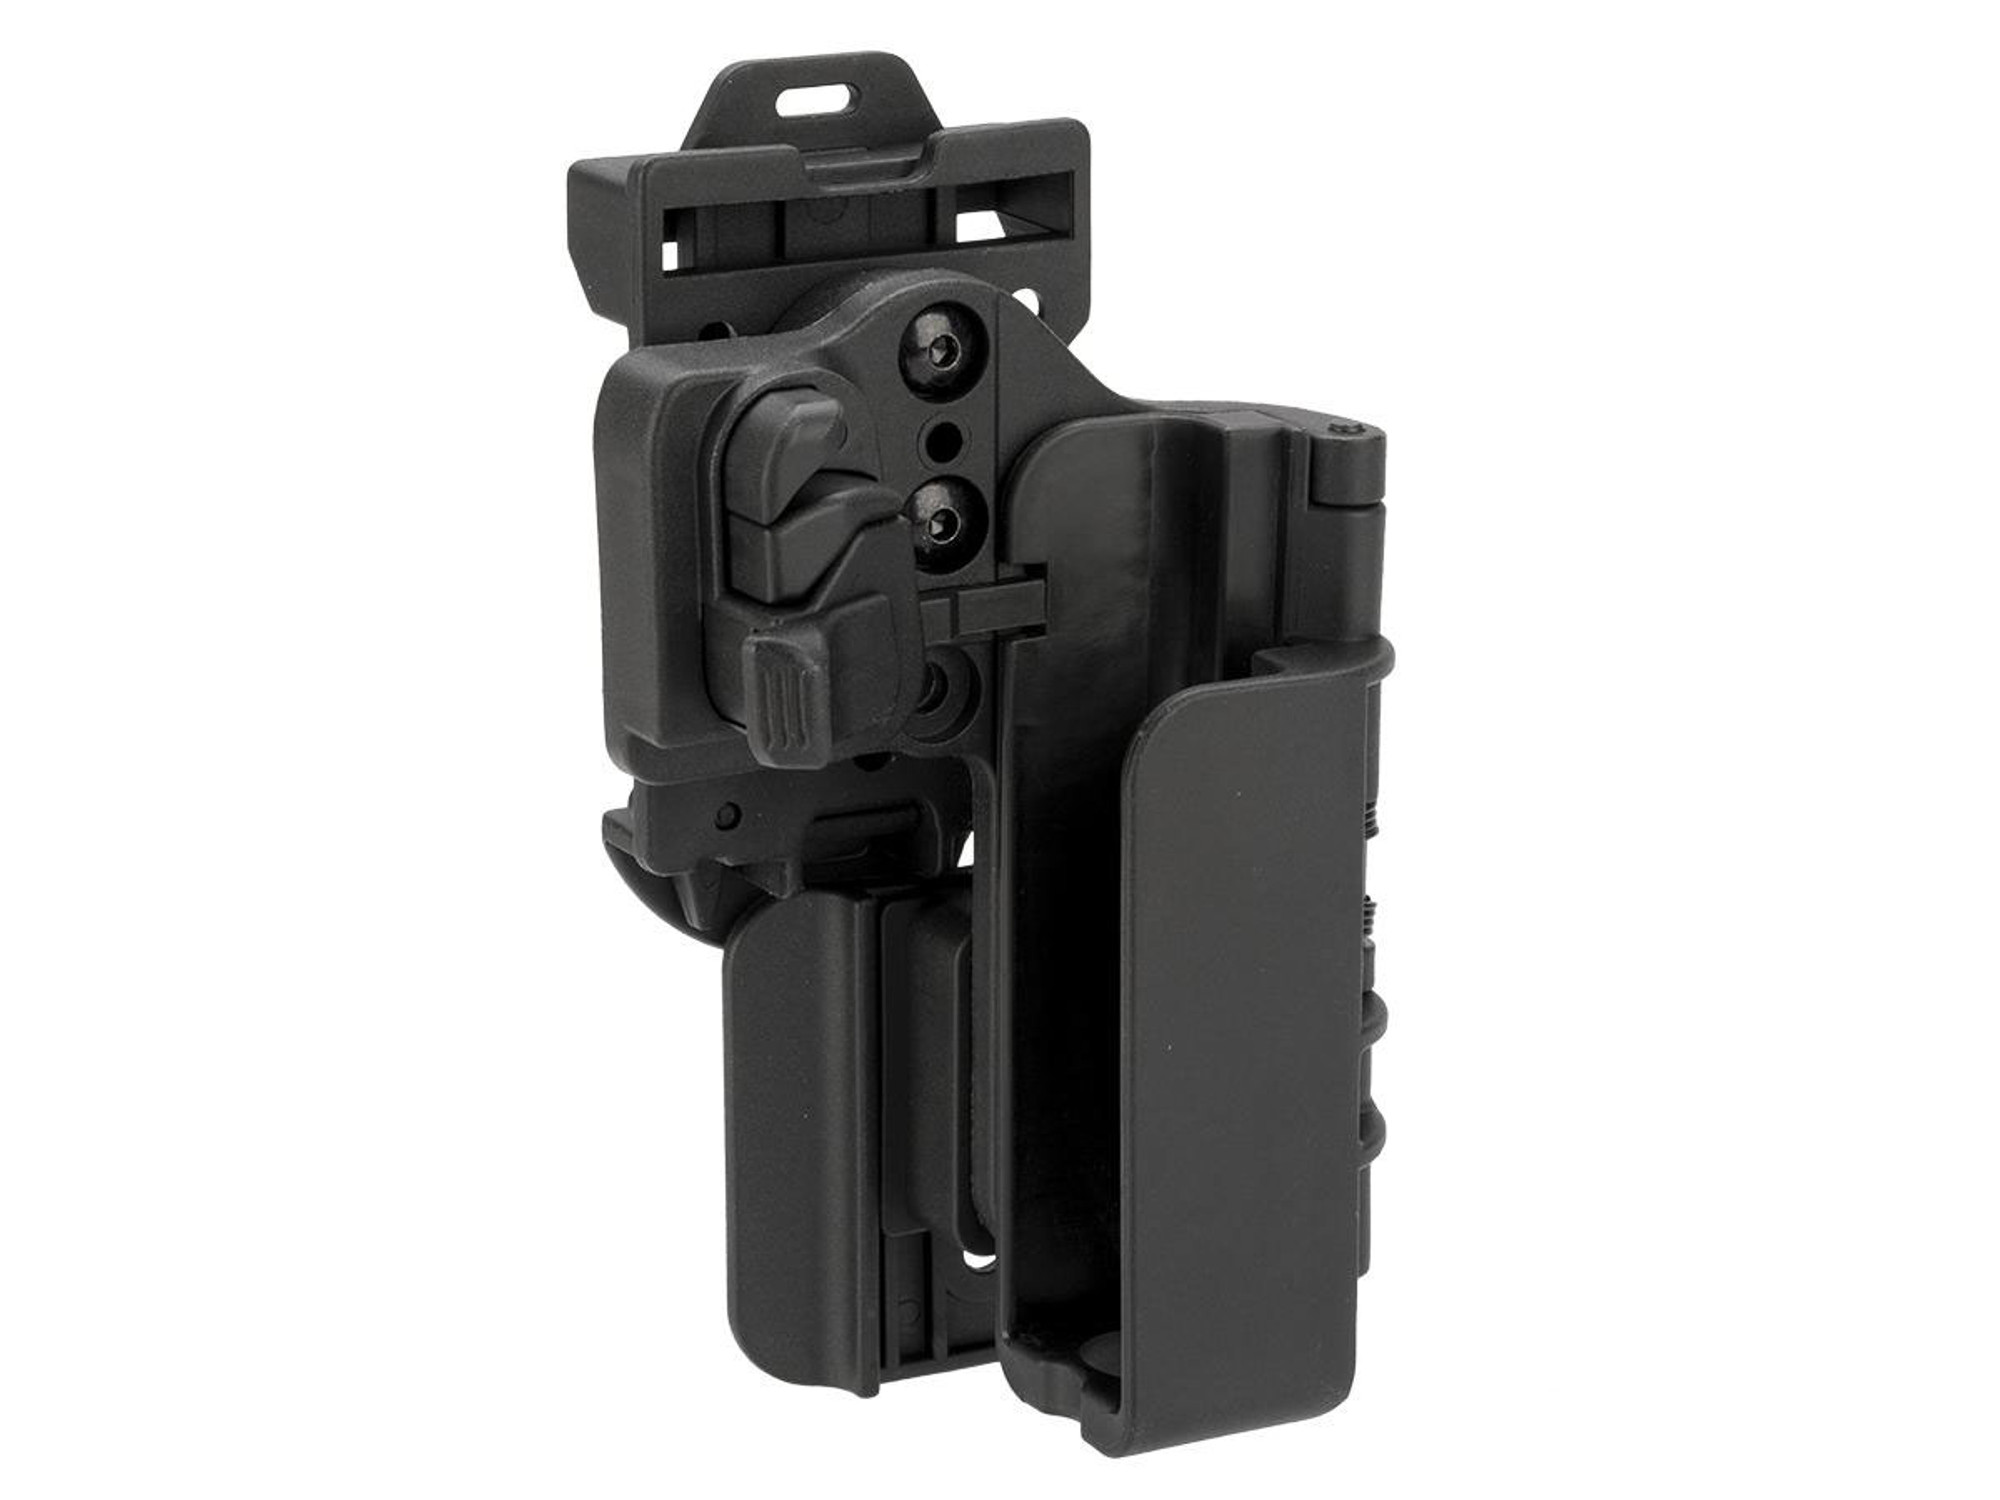 Quantum Mechanics OWB Condition 3 Carry Quick Tactical Holster (Model: Glock 19 / 23 Right Hand)